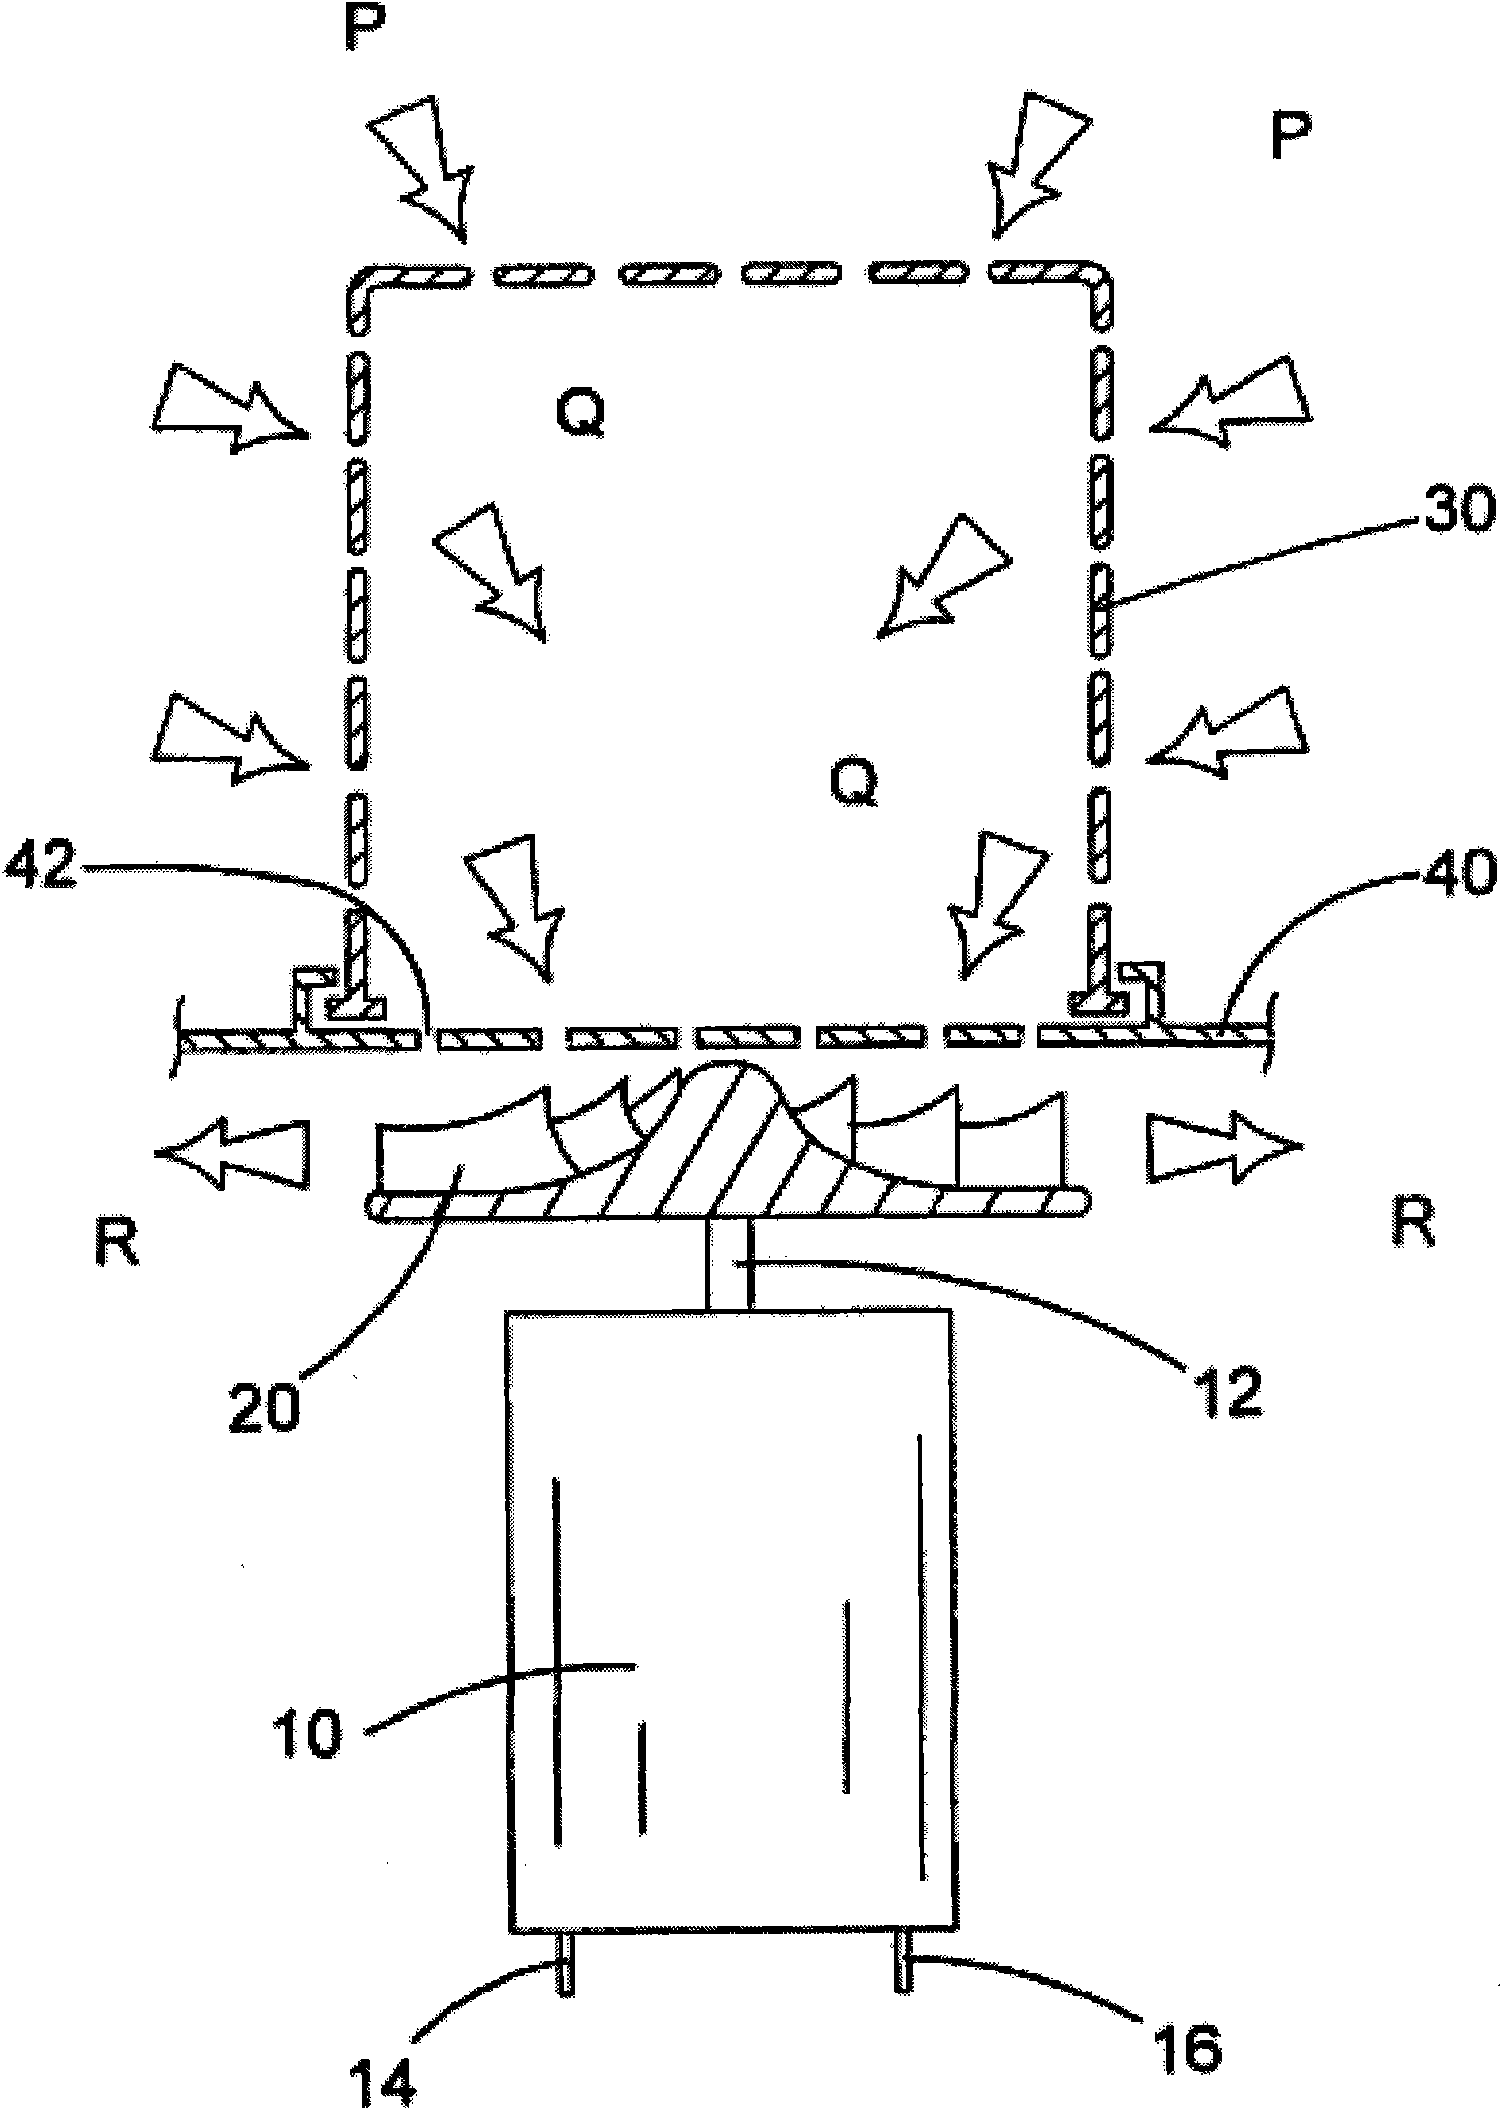 Motor, fan and filter arrangement for a vacuum cleaner